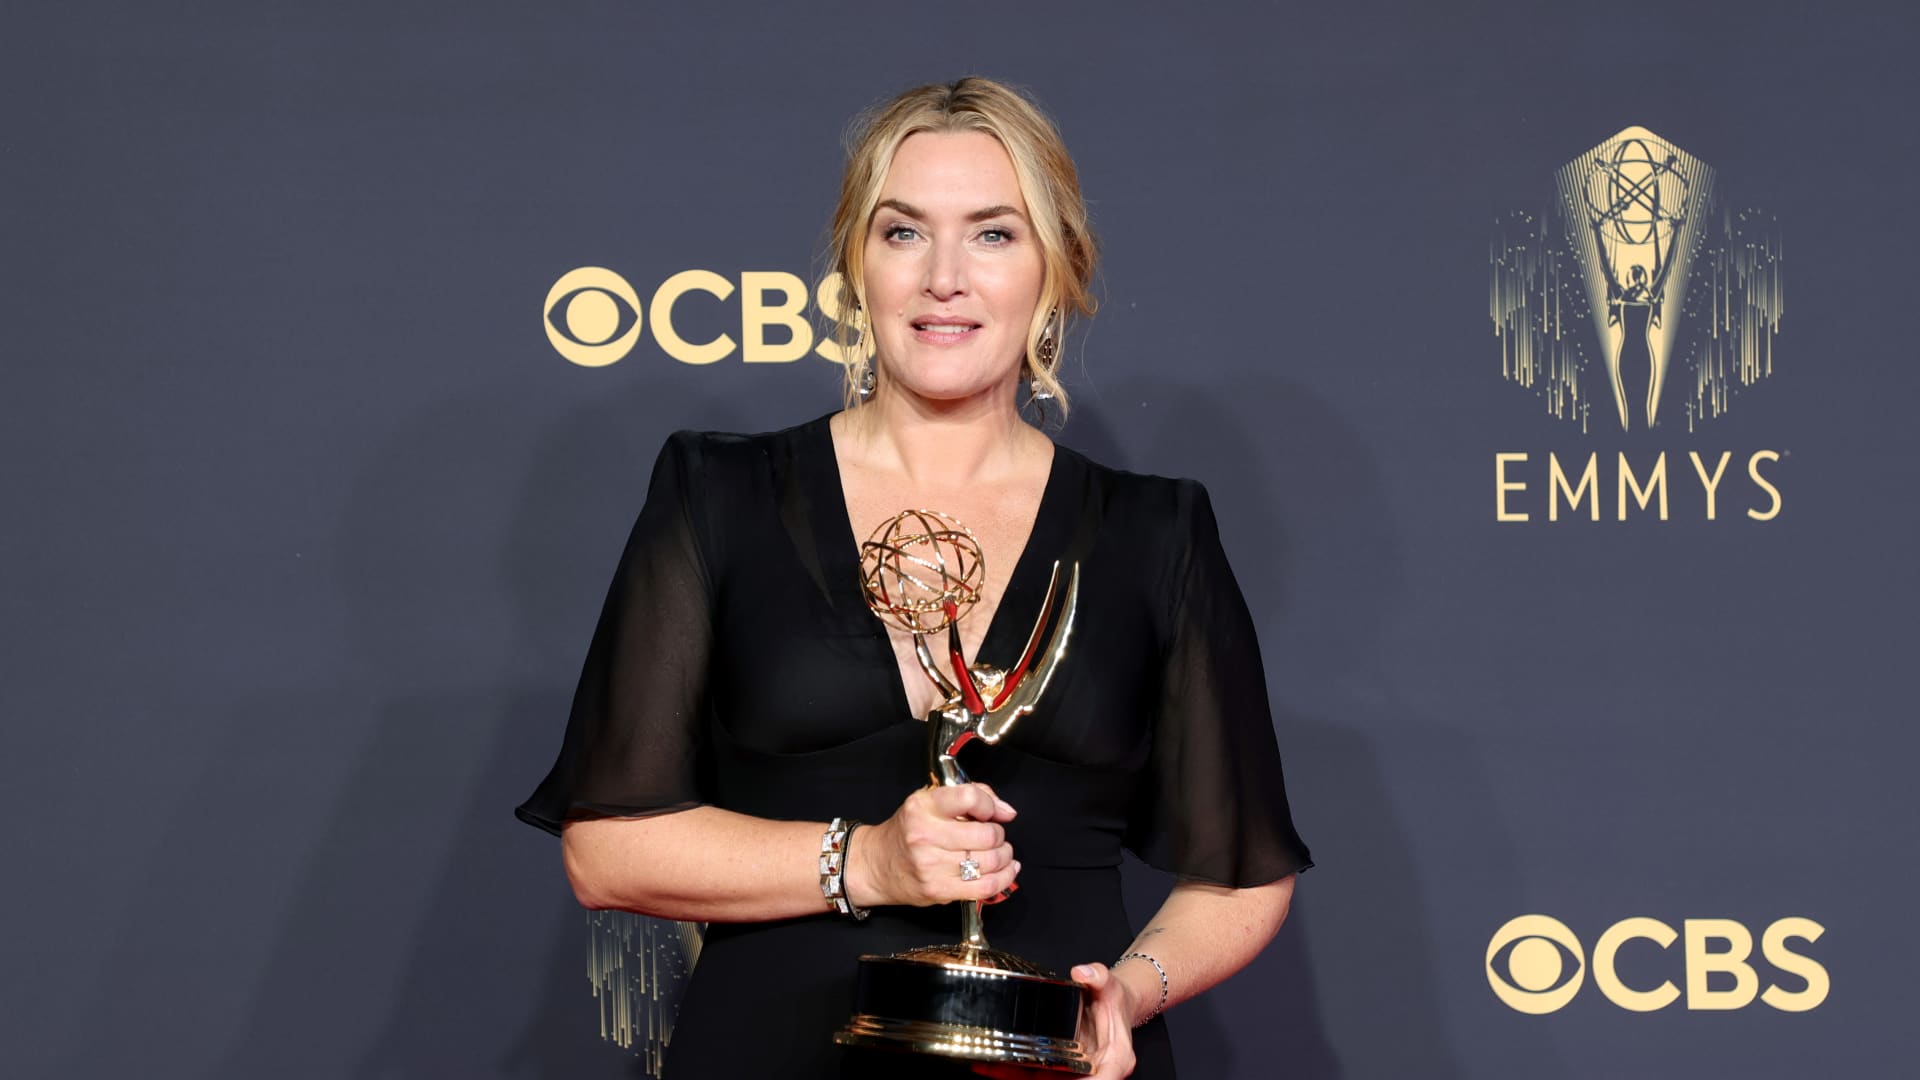 Kate Winslet, winner of the Outstanding Lead Actress in a Limited or Anthology Series or Movie award for 'Mare Of Easttown,' poses in the press room during the 73rd Primetime Emmy Awards at L.A. LIVE on September 19, 2021 in Los Angeles, California.